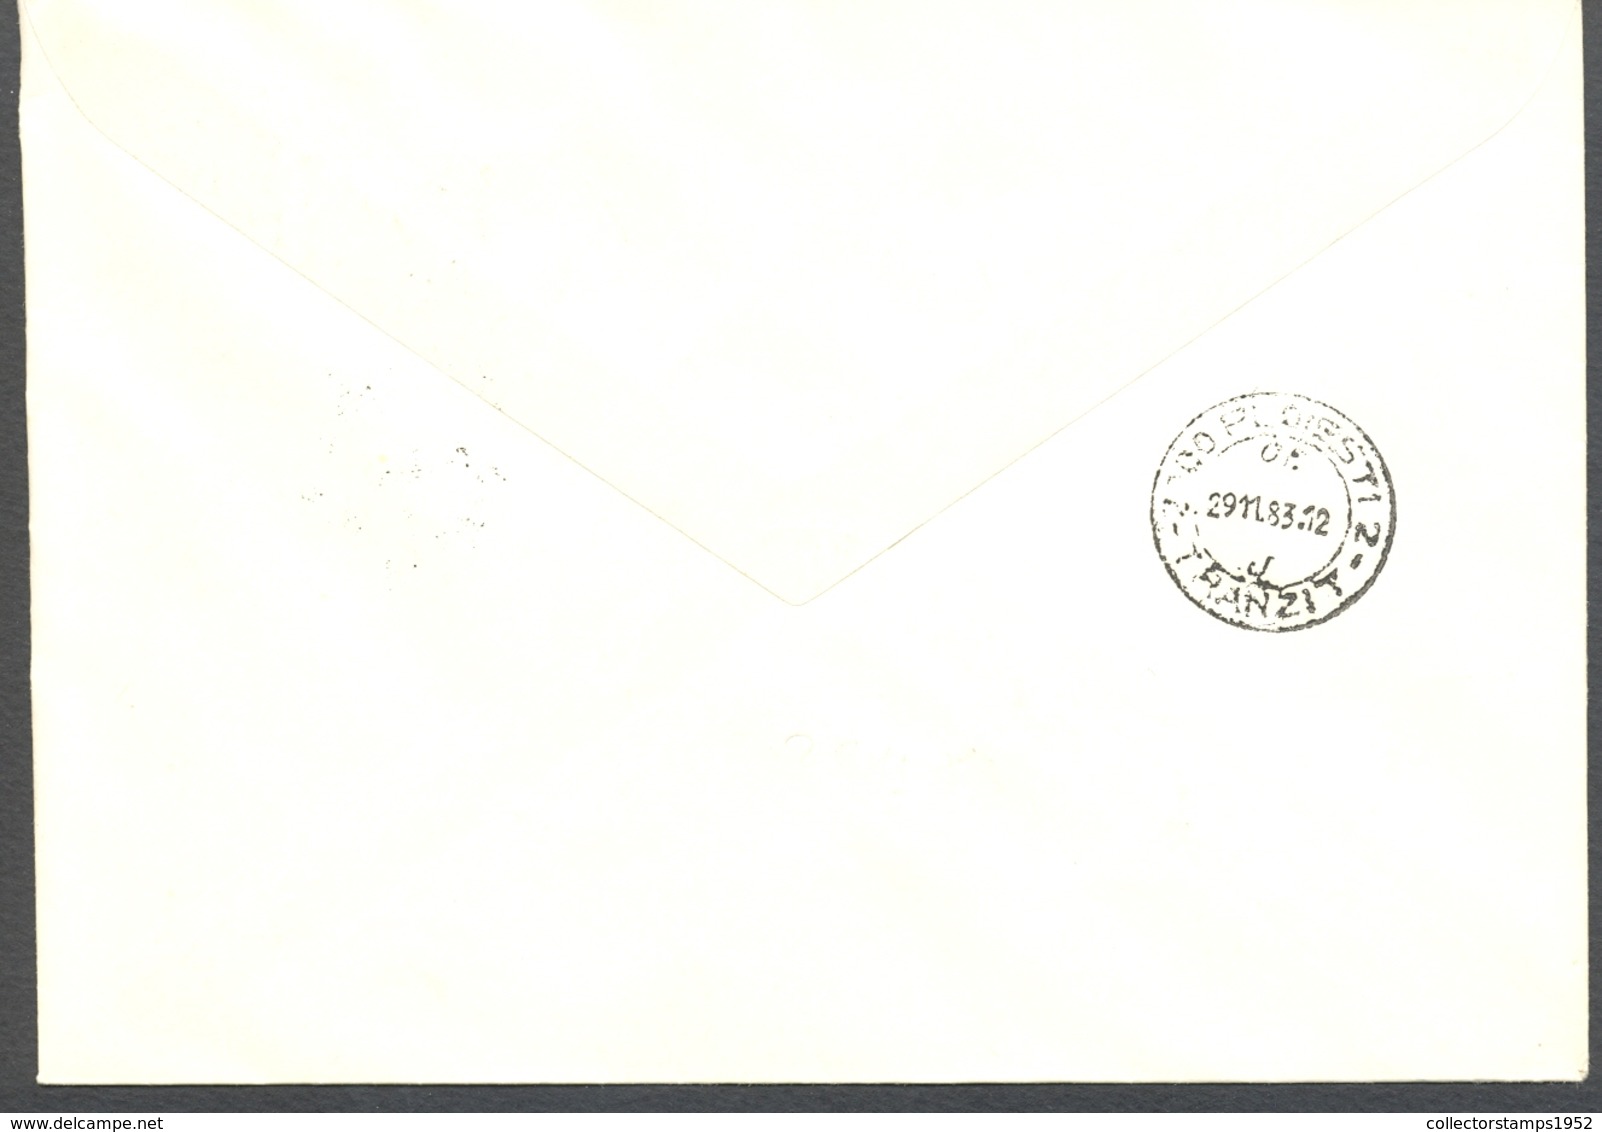 75077- ROMANIAN PHILATELISTS ASSOCIATION STAMP AND SPECIAL POSTMARK ON COVER, 1983, ROMANIA - Covers & Documents